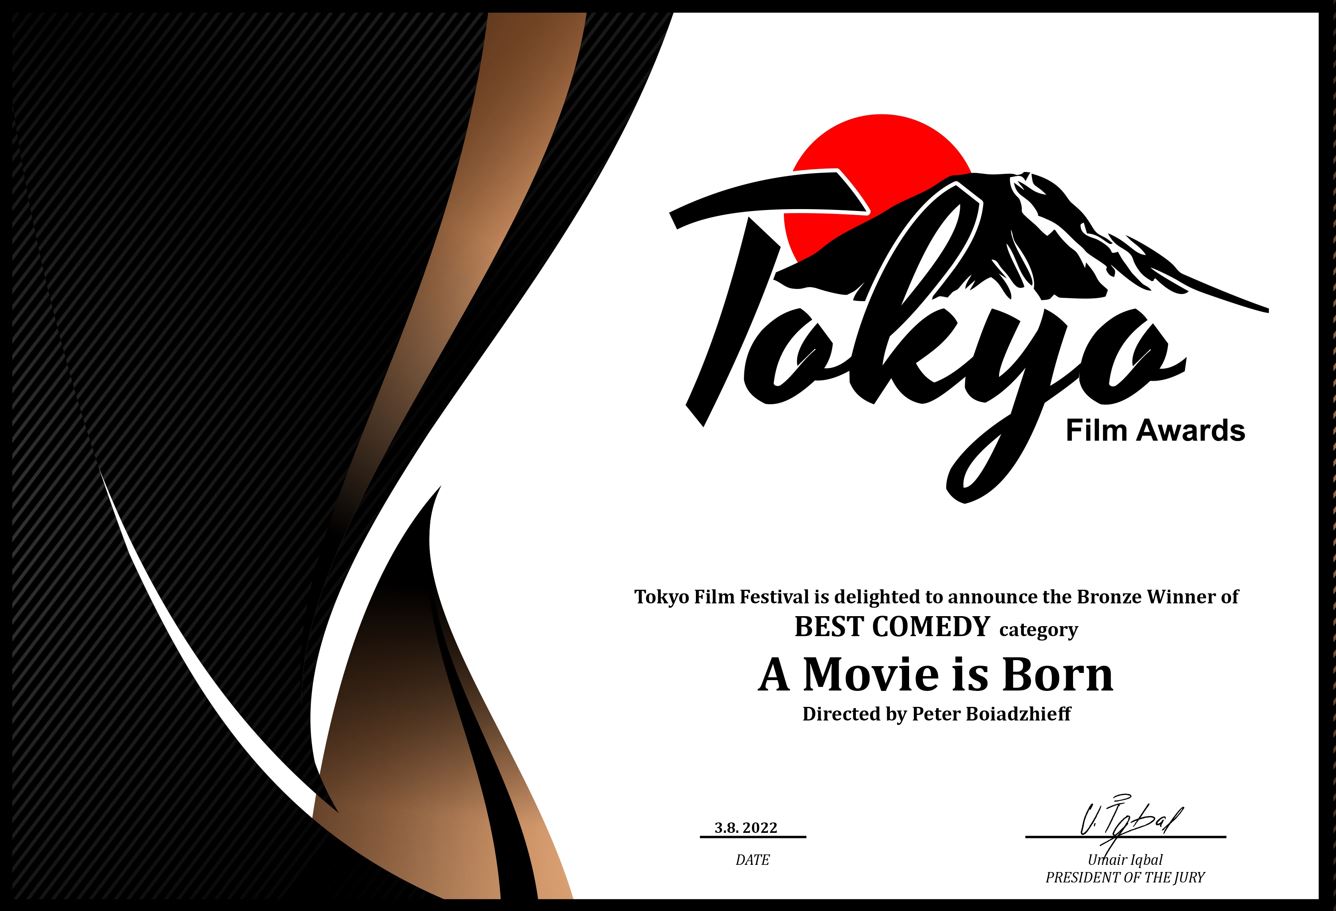 Certificate of achievement by Tokyo Film Awards